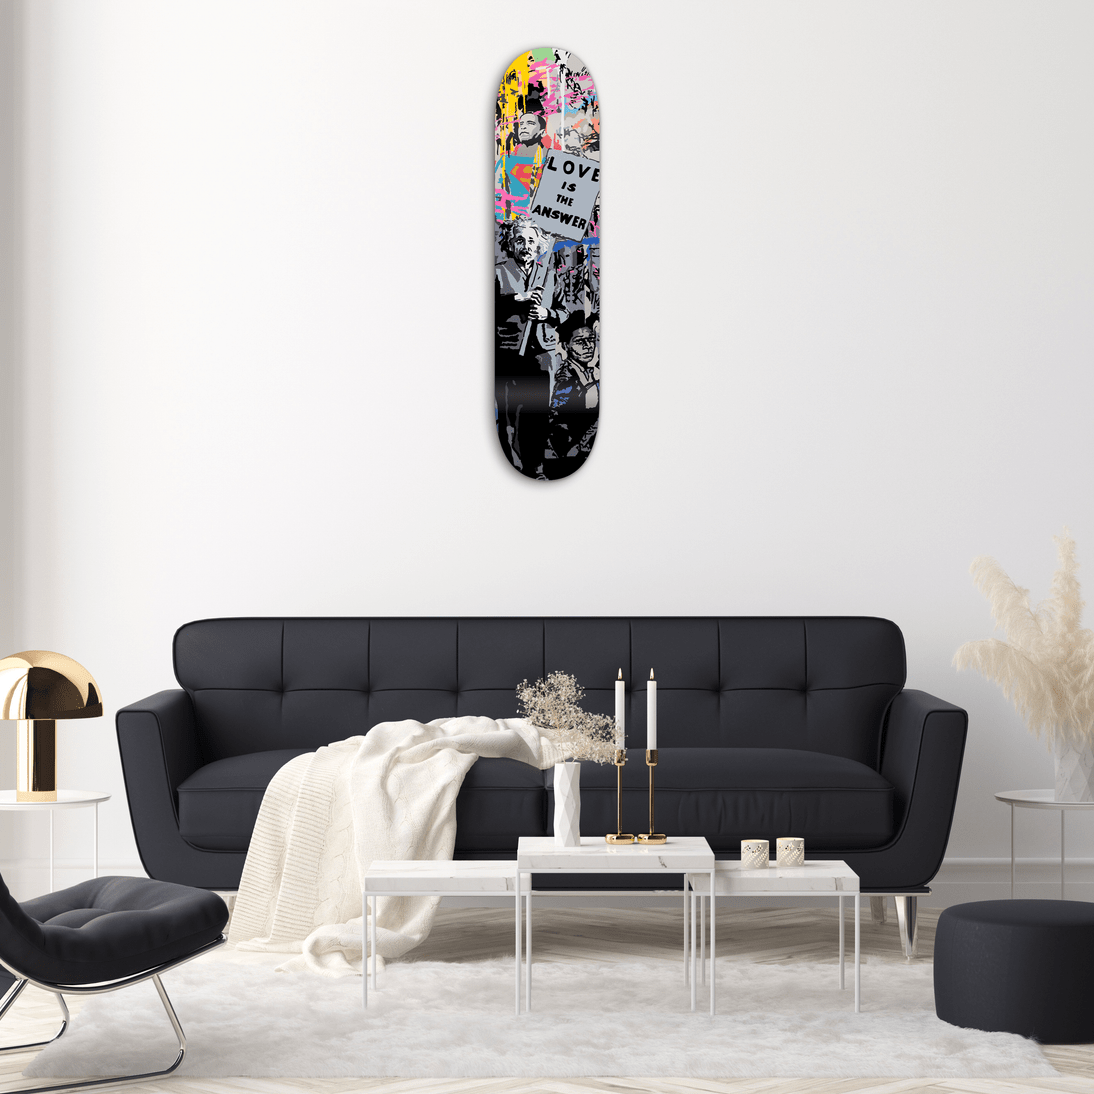 "Love Is The Answer" - Skateboard - The Art Lab Acrylic Glass Art - Skateboards, Surfboards & Glass Prints Wall Decor for your Home.